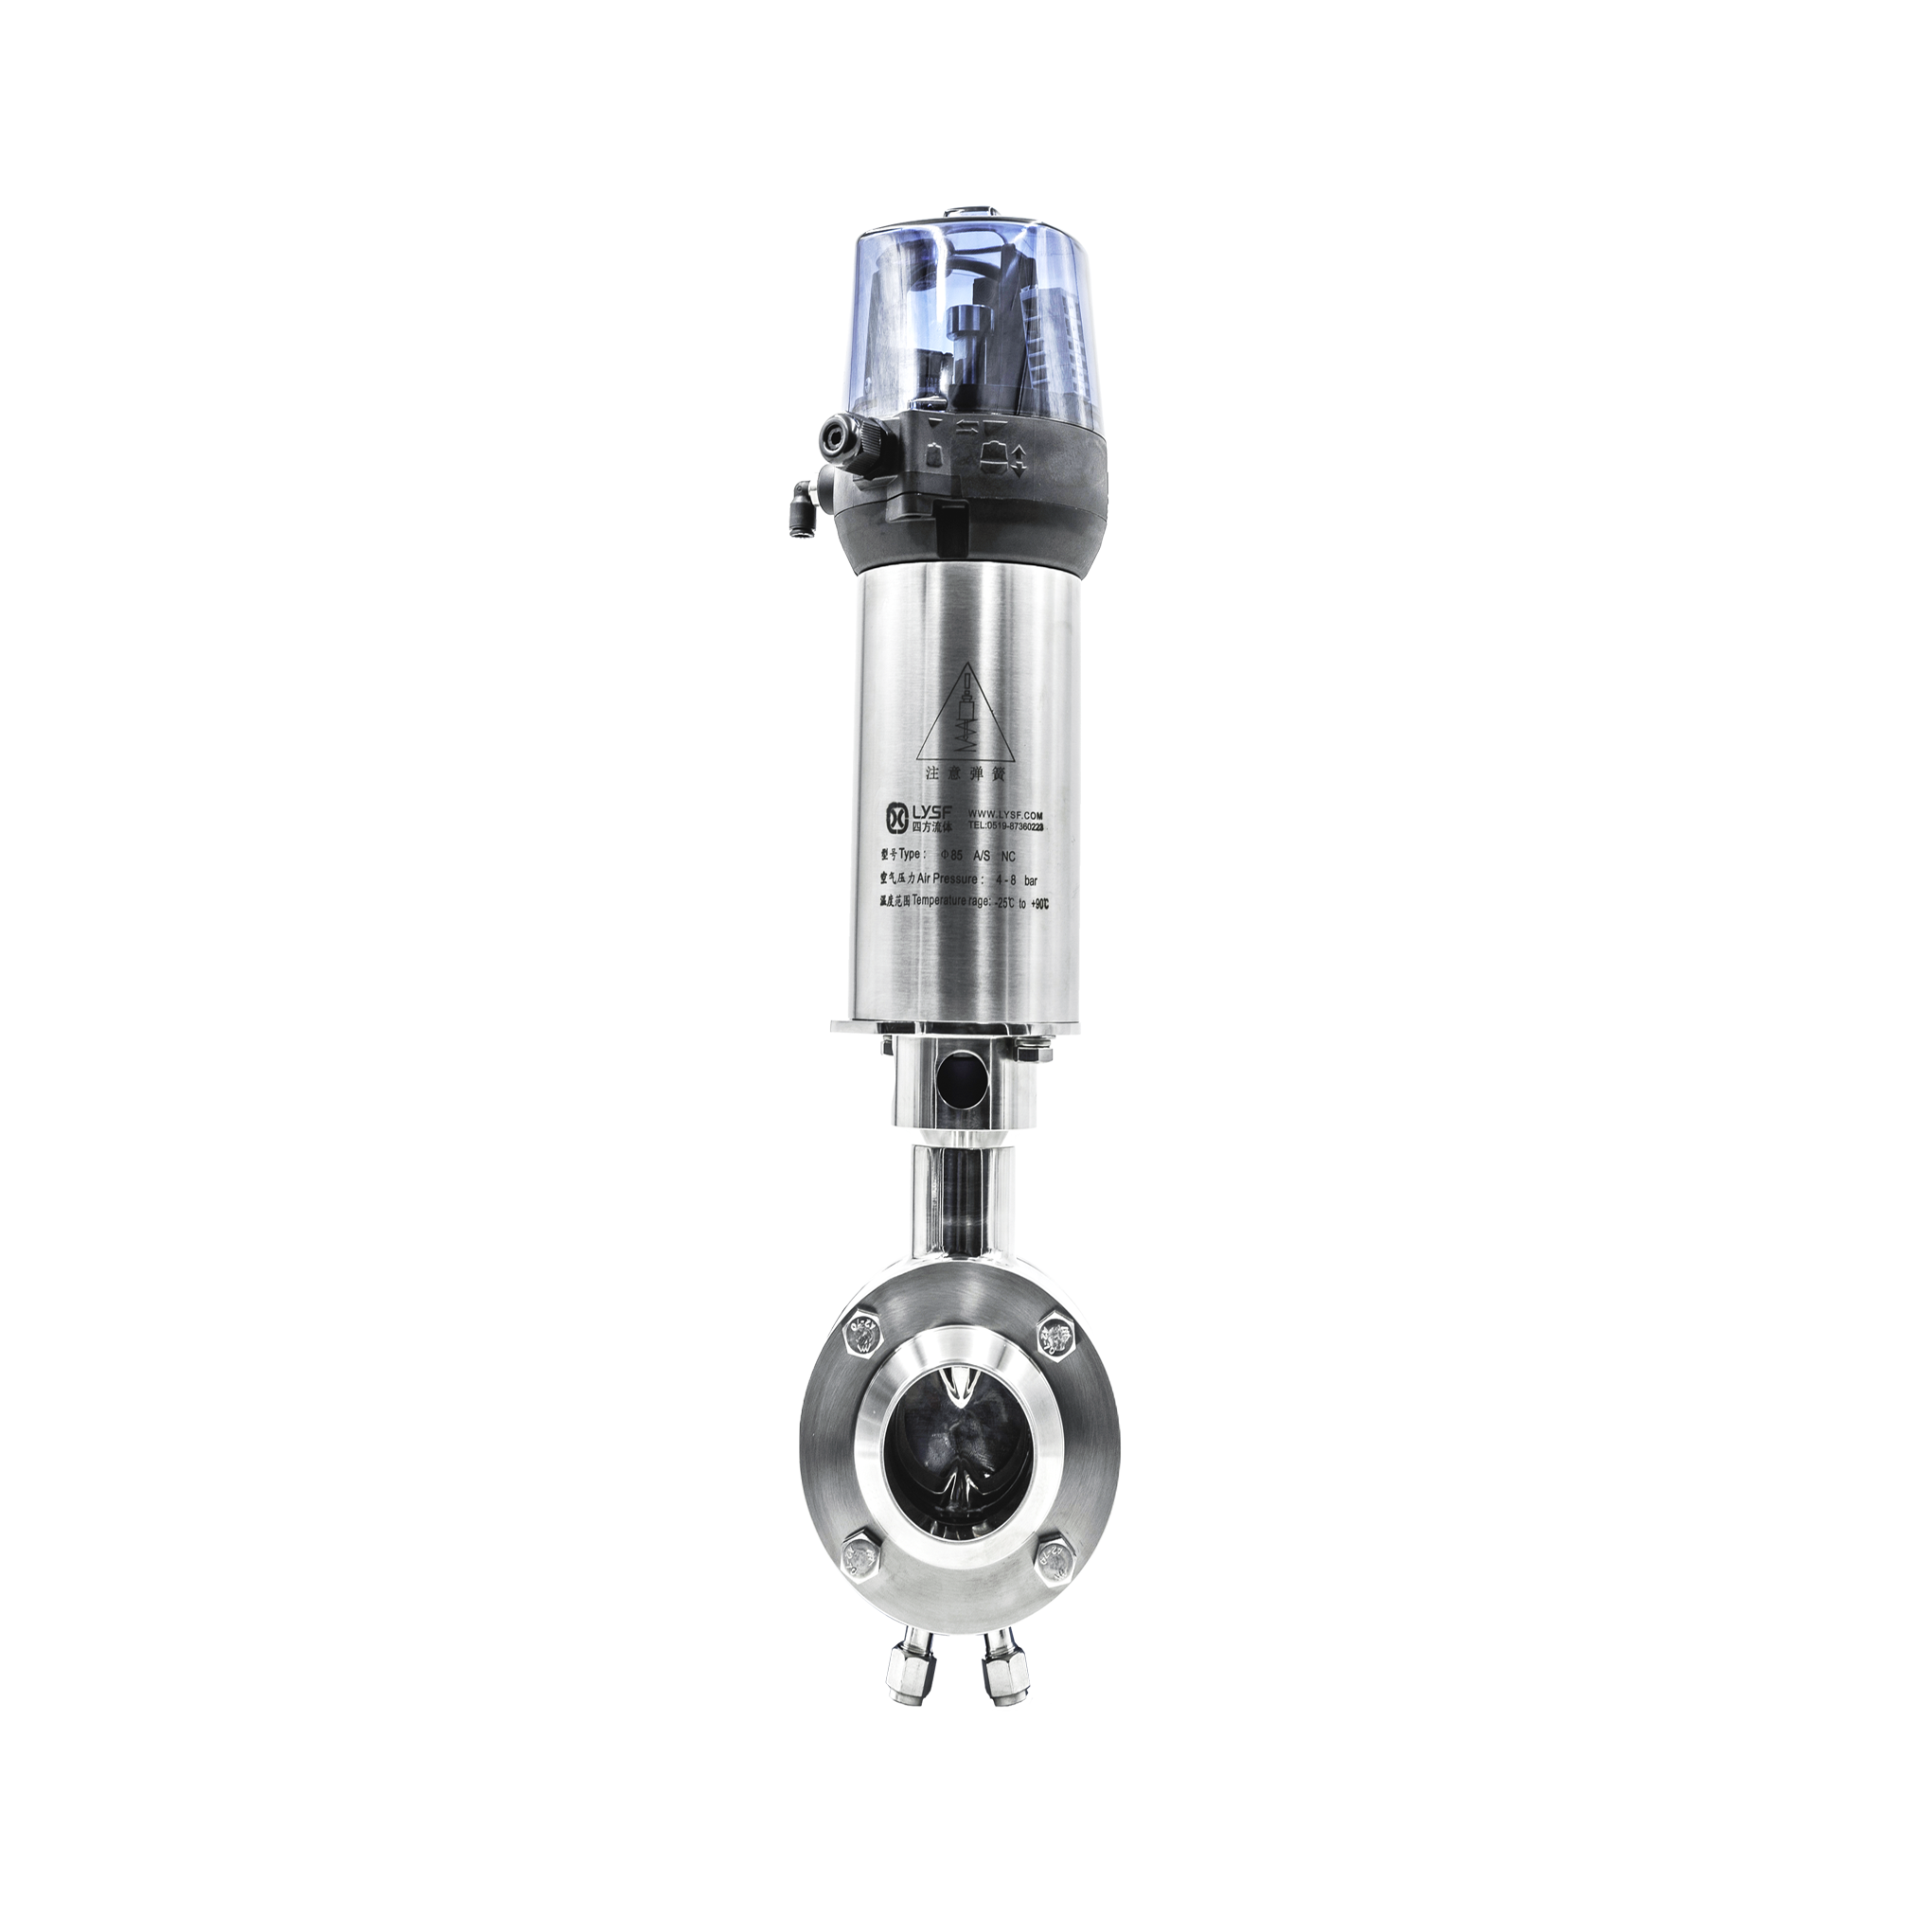 Pneumatic mixing-proof butterfly valve